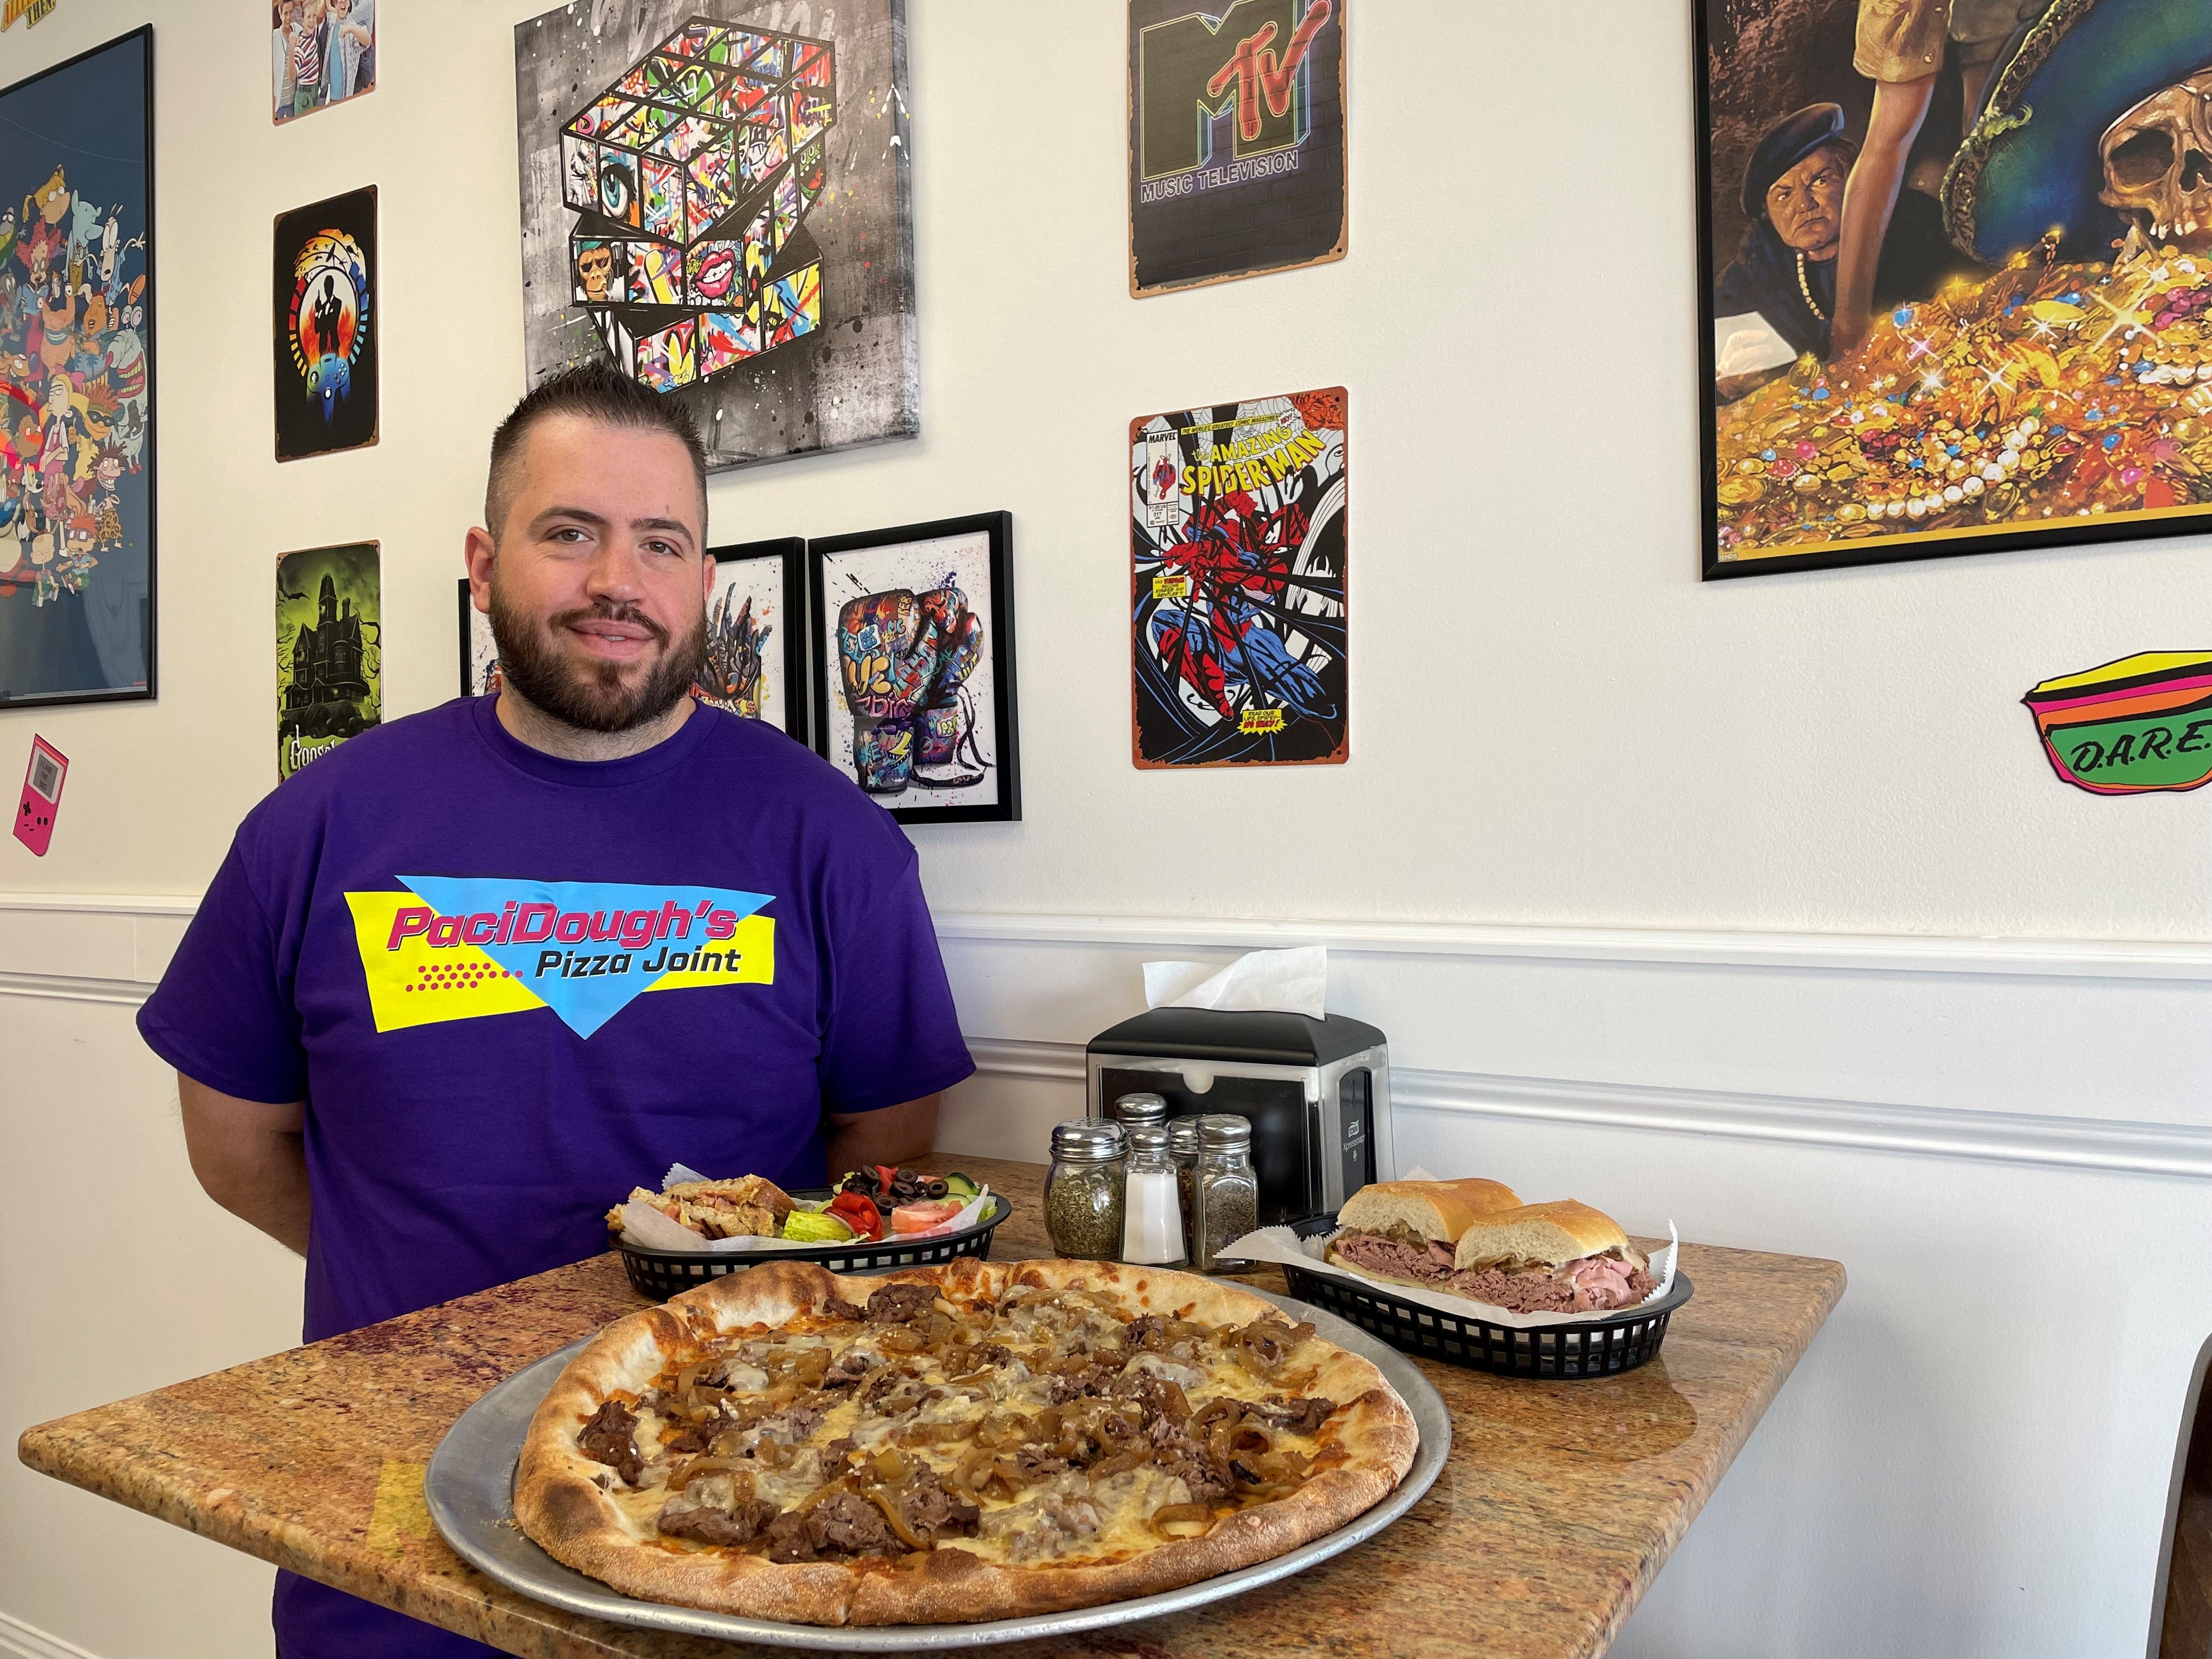 The new PaciDough's Pizza Joint in South Toms River has sourdough pizza and a '90s theme